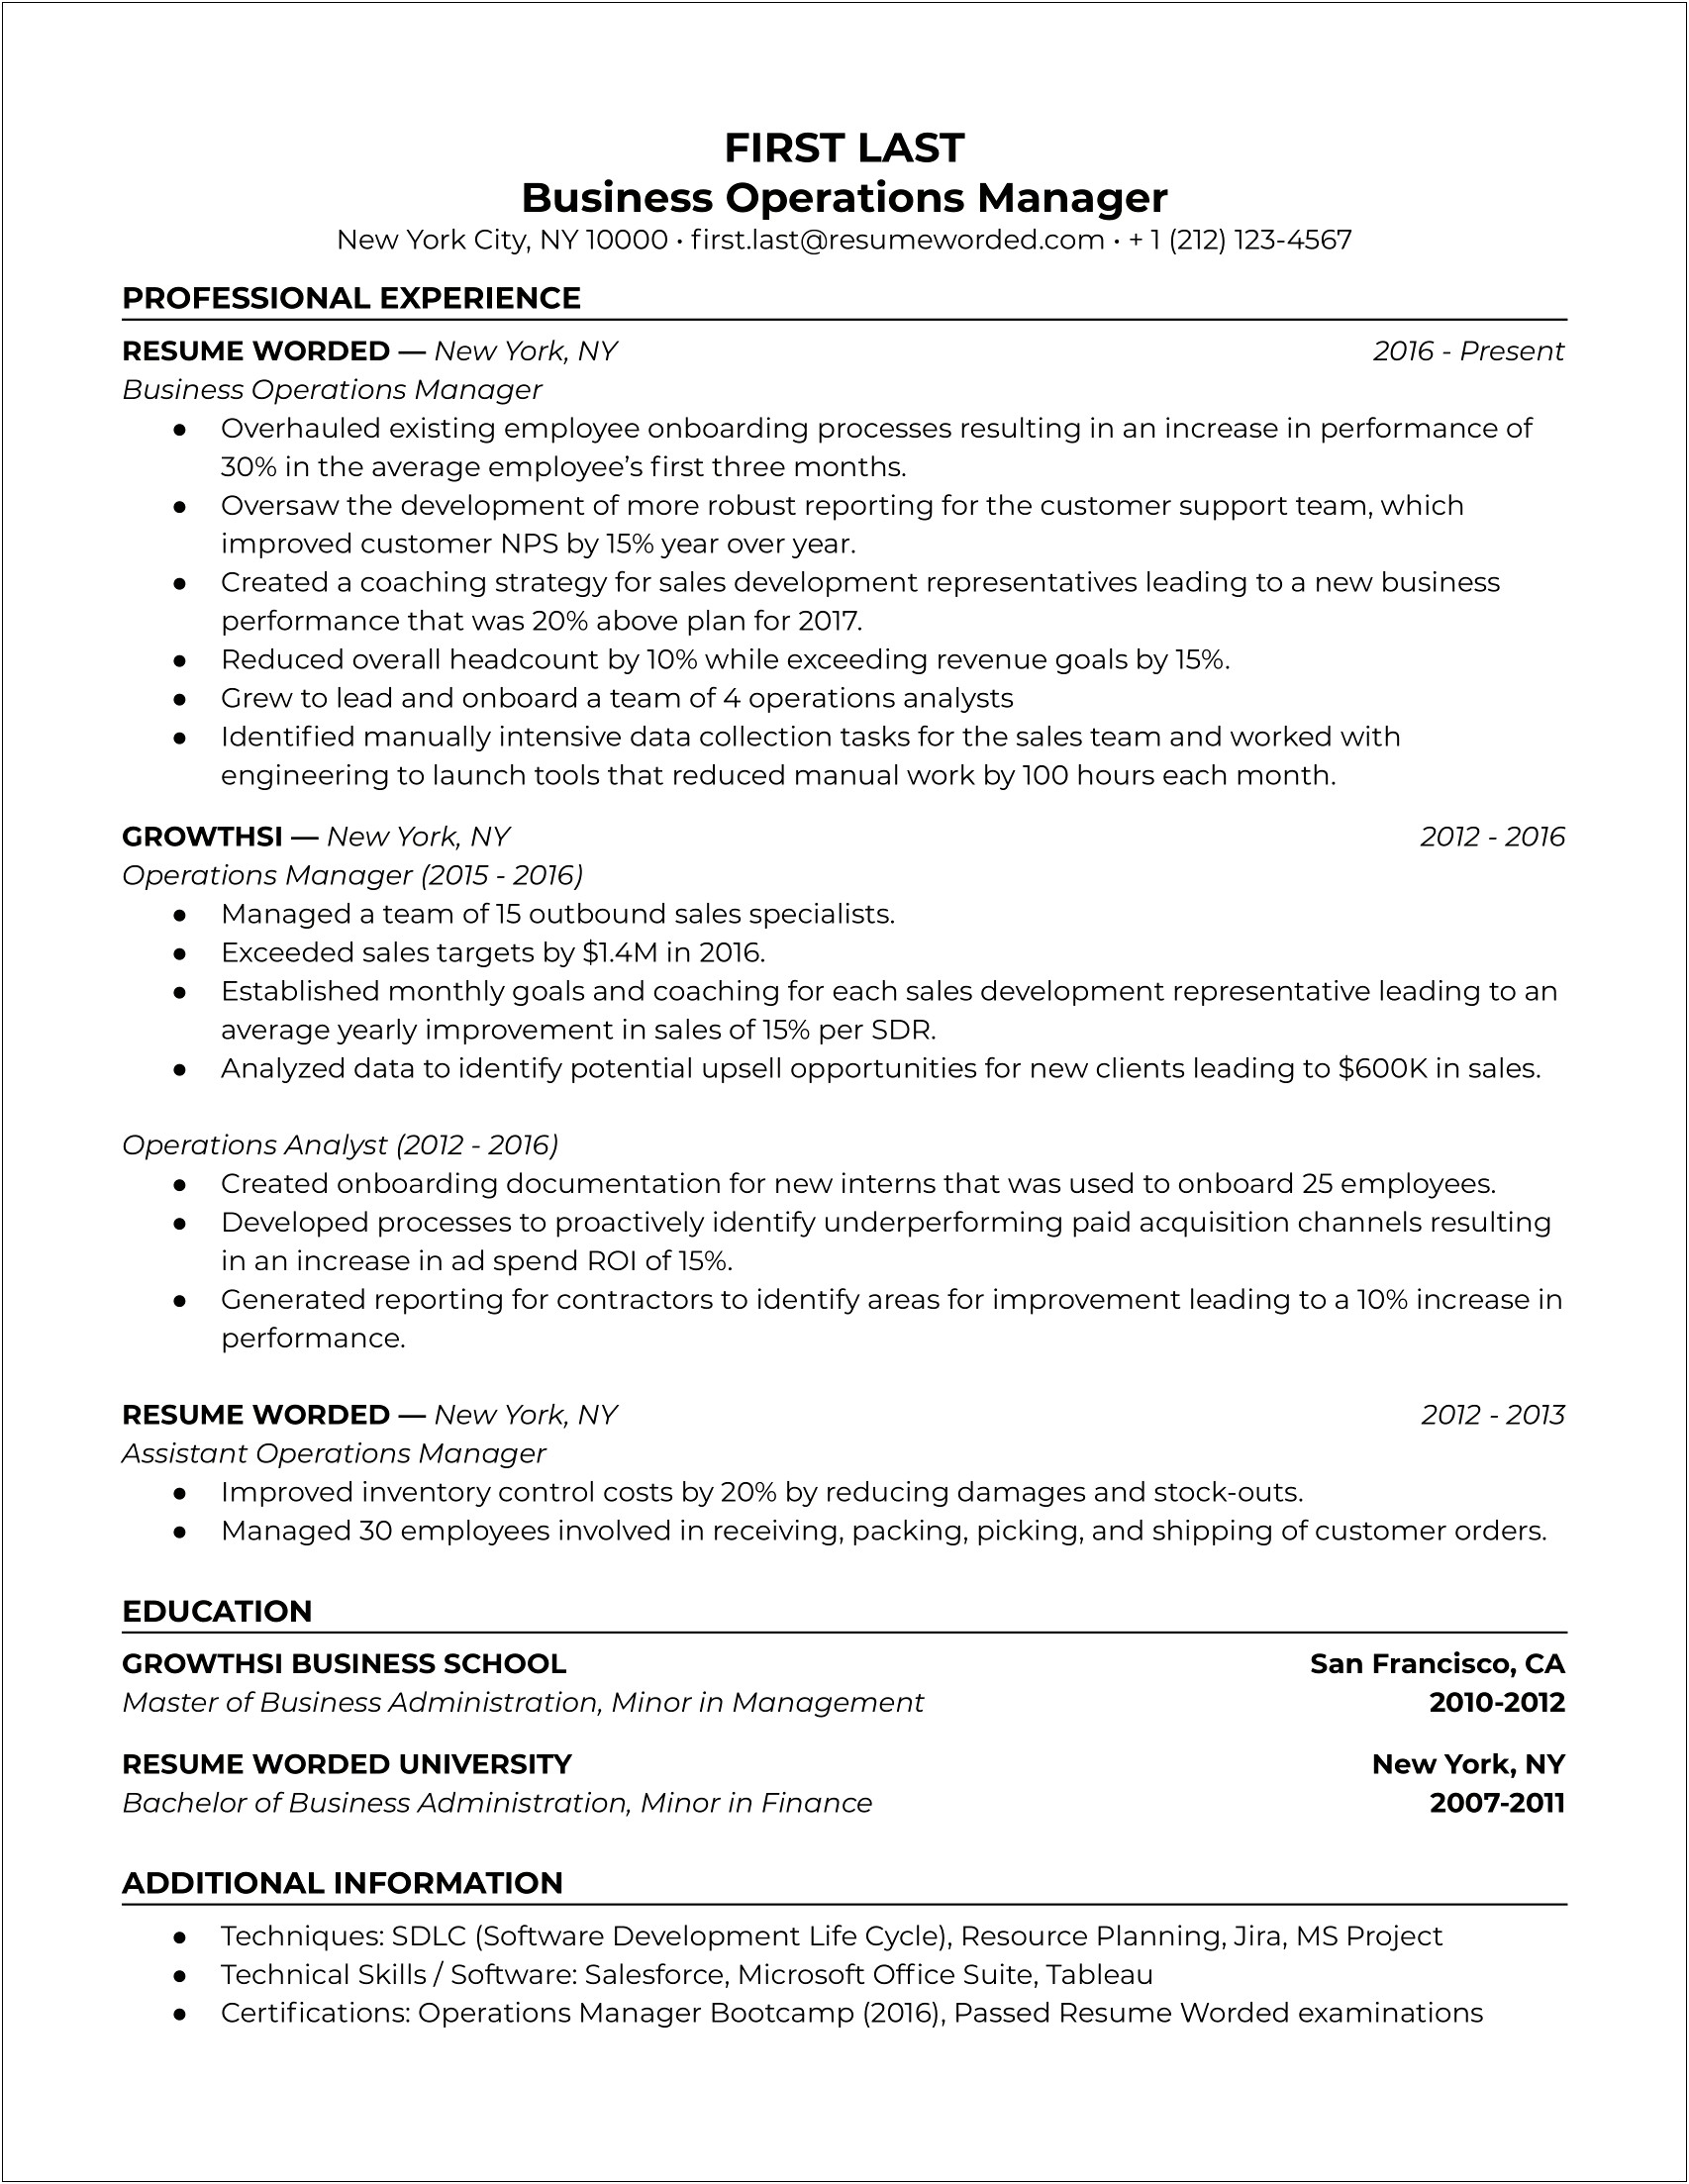 Sample Resume For Bank Service Manager